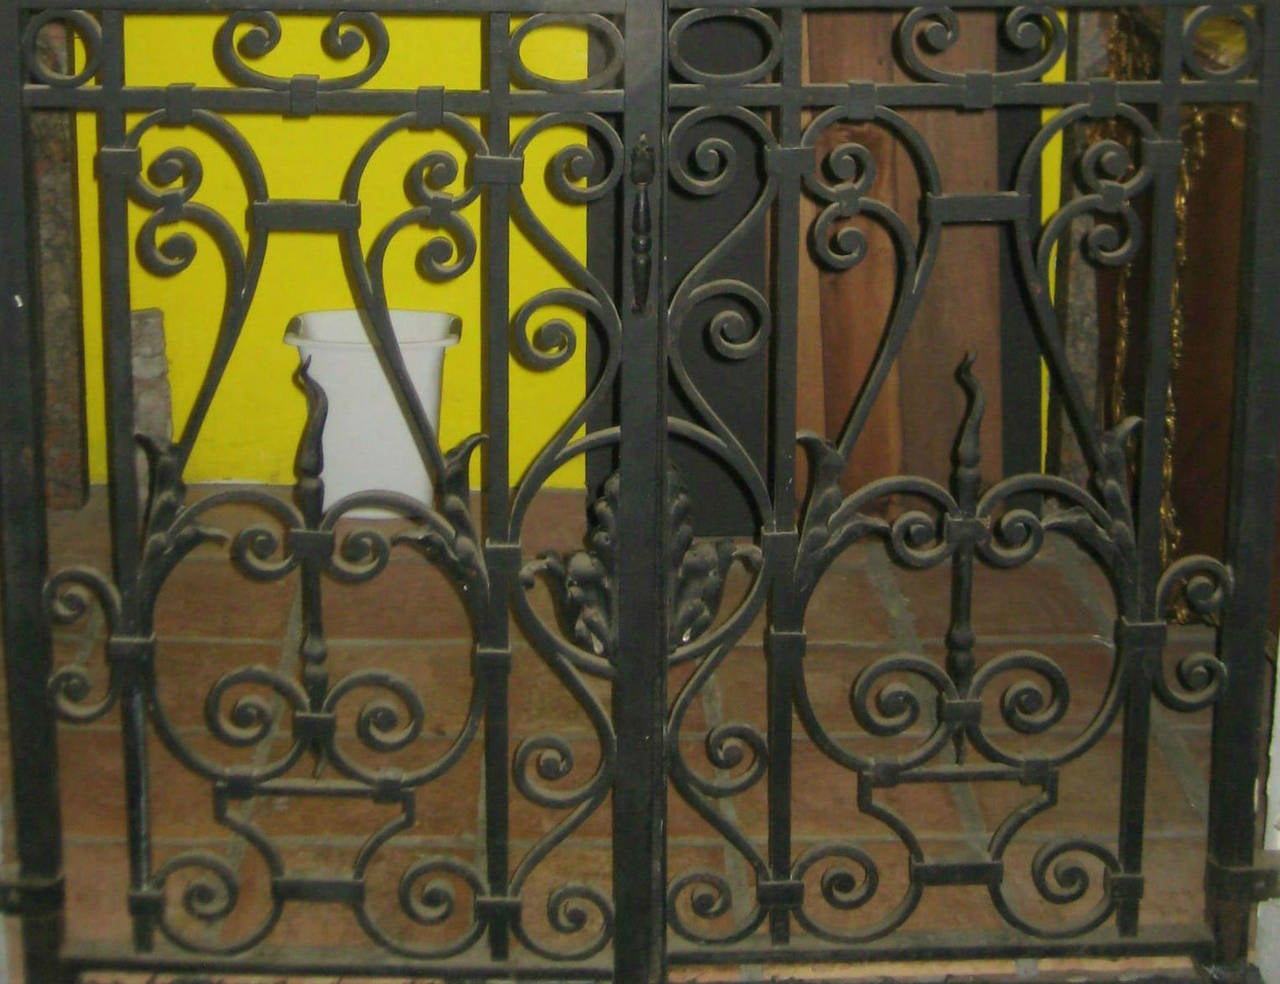 Magnificent antique wrought iron double garden gates with scroll-work and leafage.